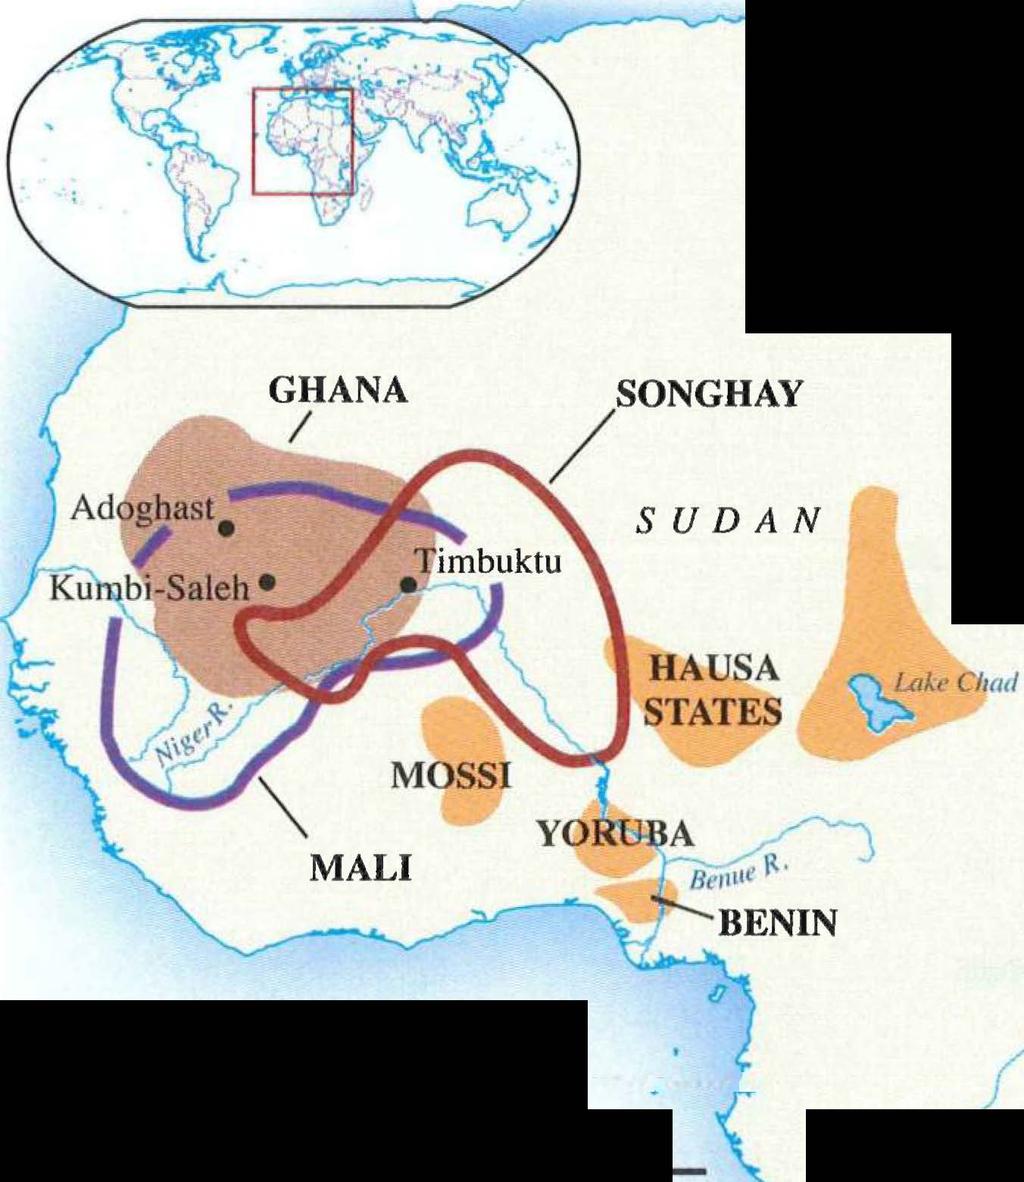 But their location on the open plains of the dry sahel also meant that these states were subject to attack and periodic droughts. Founded probably in the 3rd century c.e., Ghana rose to power by taxing the salt and gold exchanged within its borders.